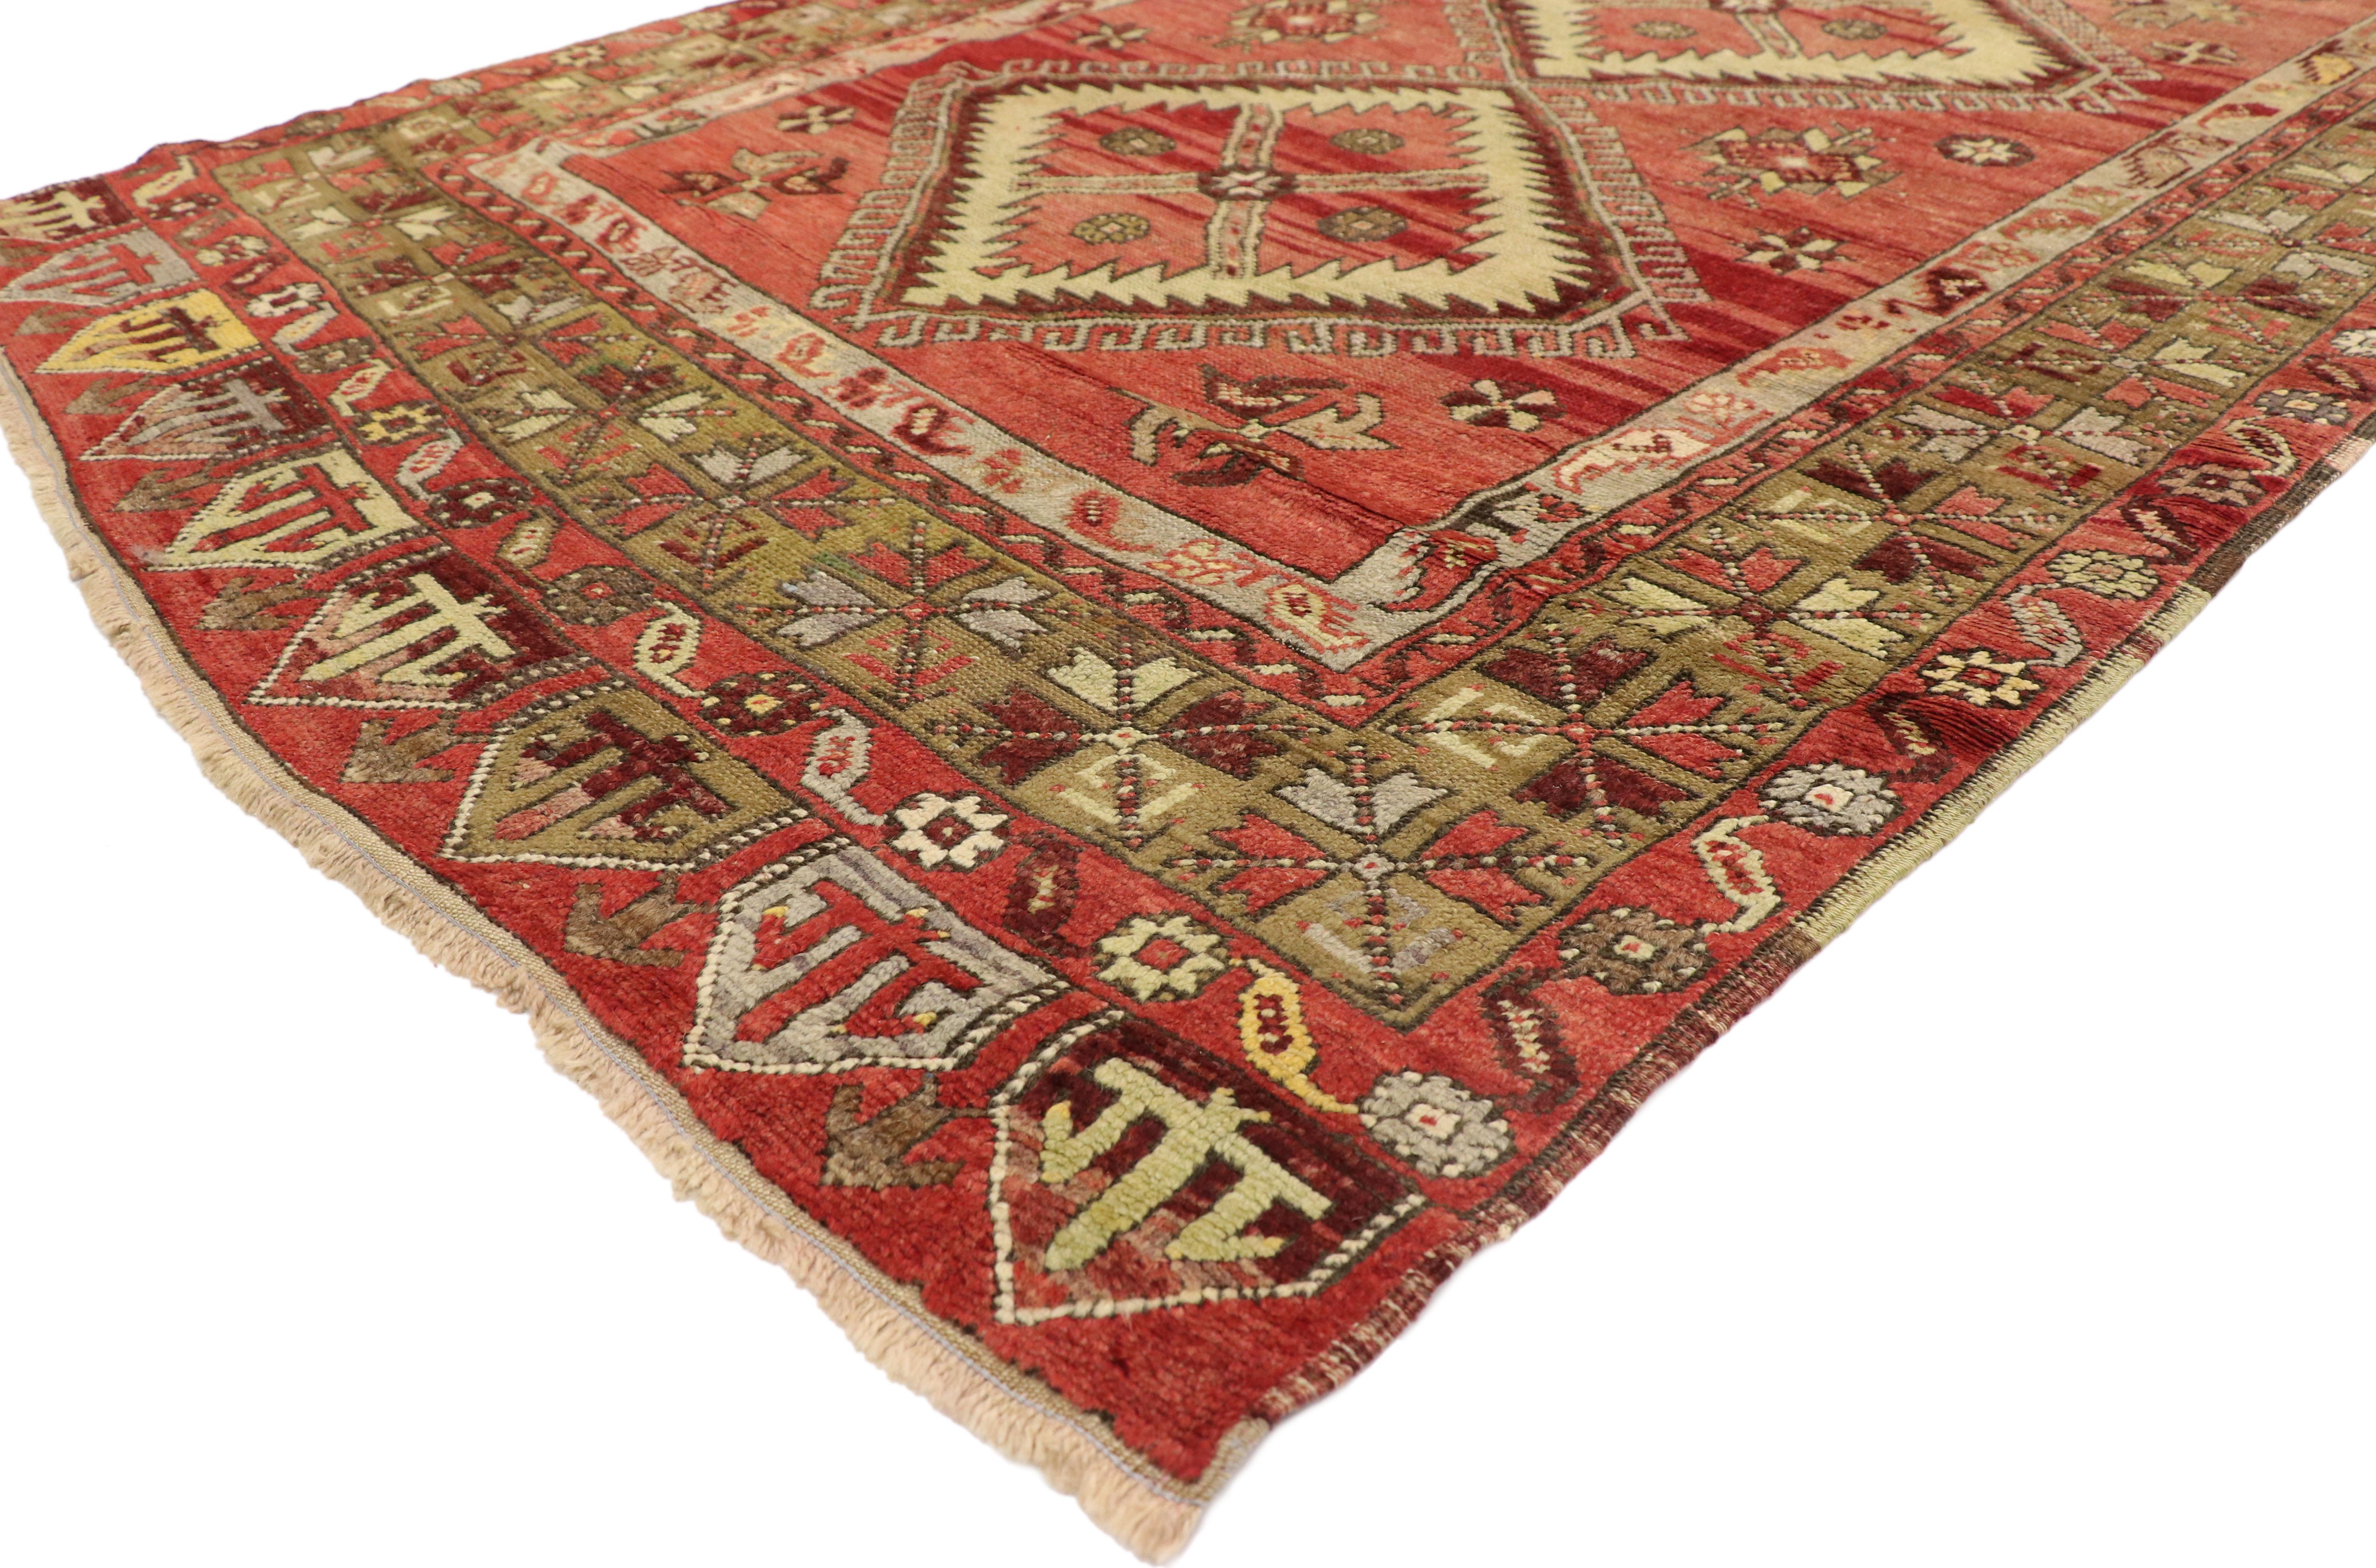 50868 Vintage Turkish Oushak Runner with Mid-Century Modern Tribal Style, Extra-Long Hallway Runner 05'00 x 20'06. With its mid-century modern style and nomadic tribal vibes, this hand-knotted wool vintage Turkish Oushak runner showcases an intense